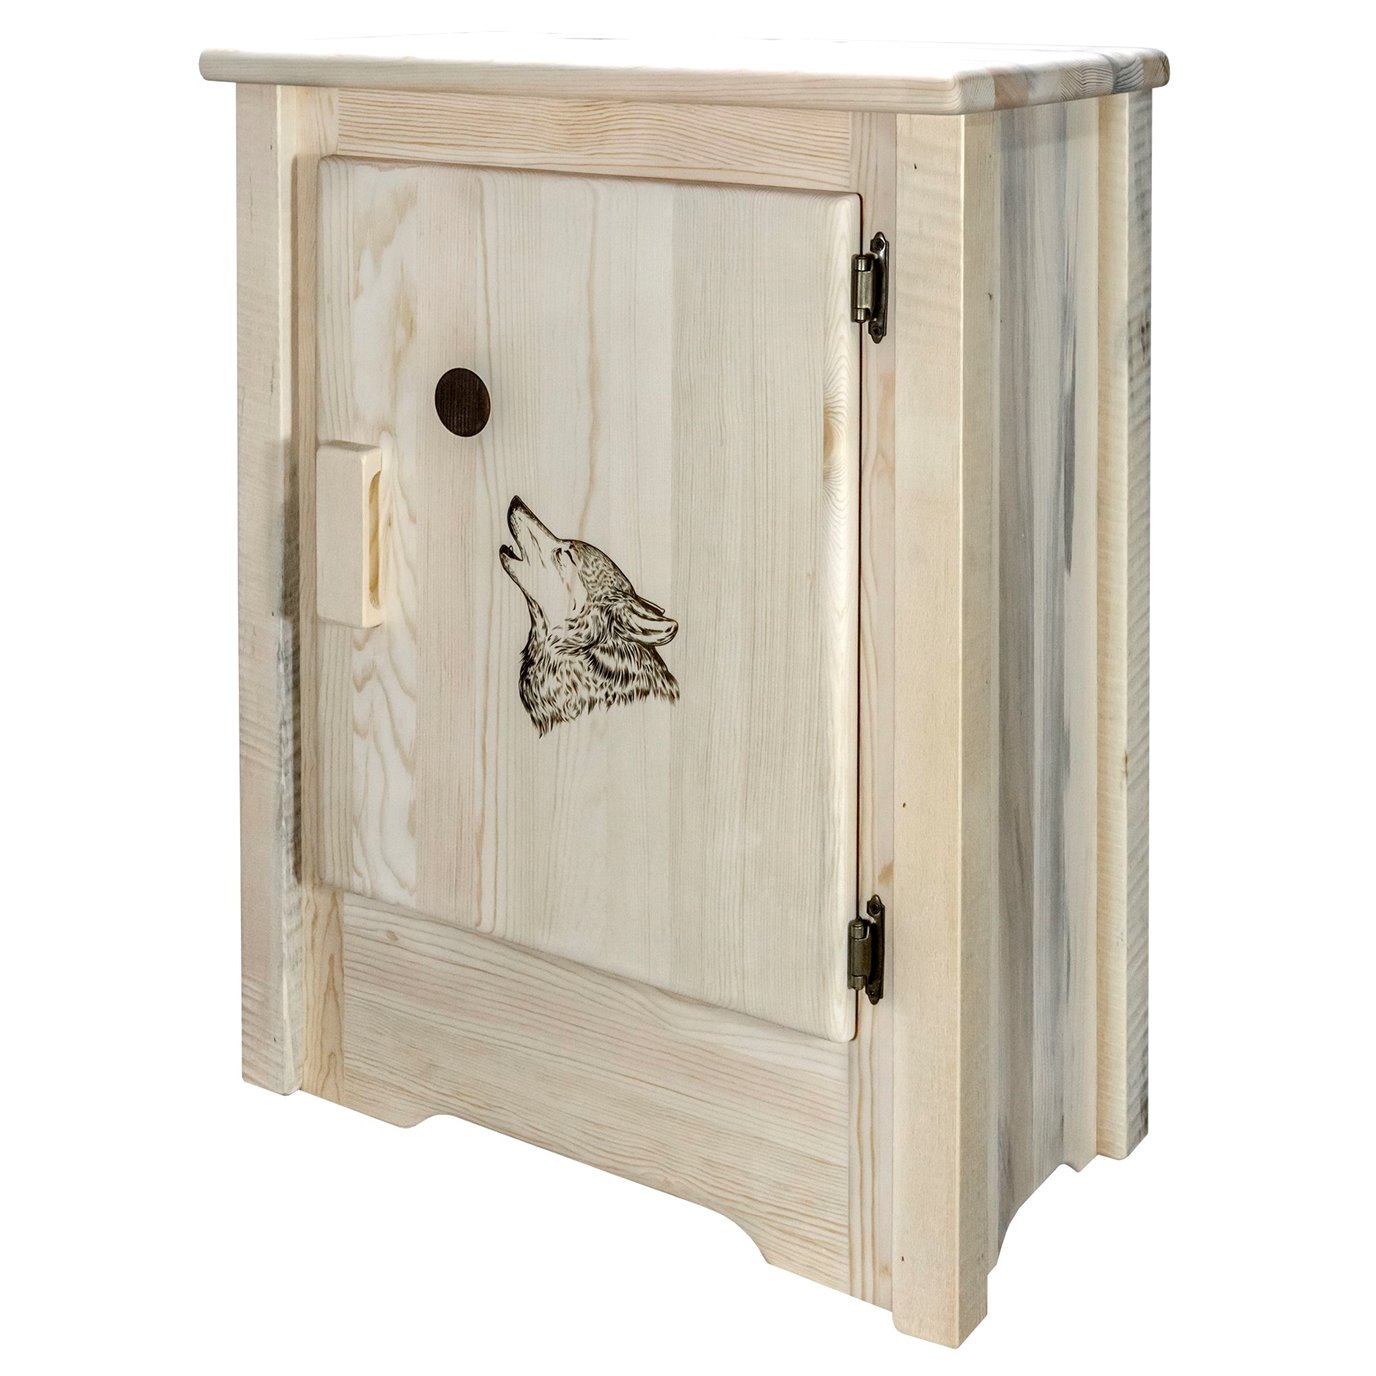 Homestead Right Hinged Accent Cabinet w/ Laser Engraved Wolf Design - Clear Lacquer Finish